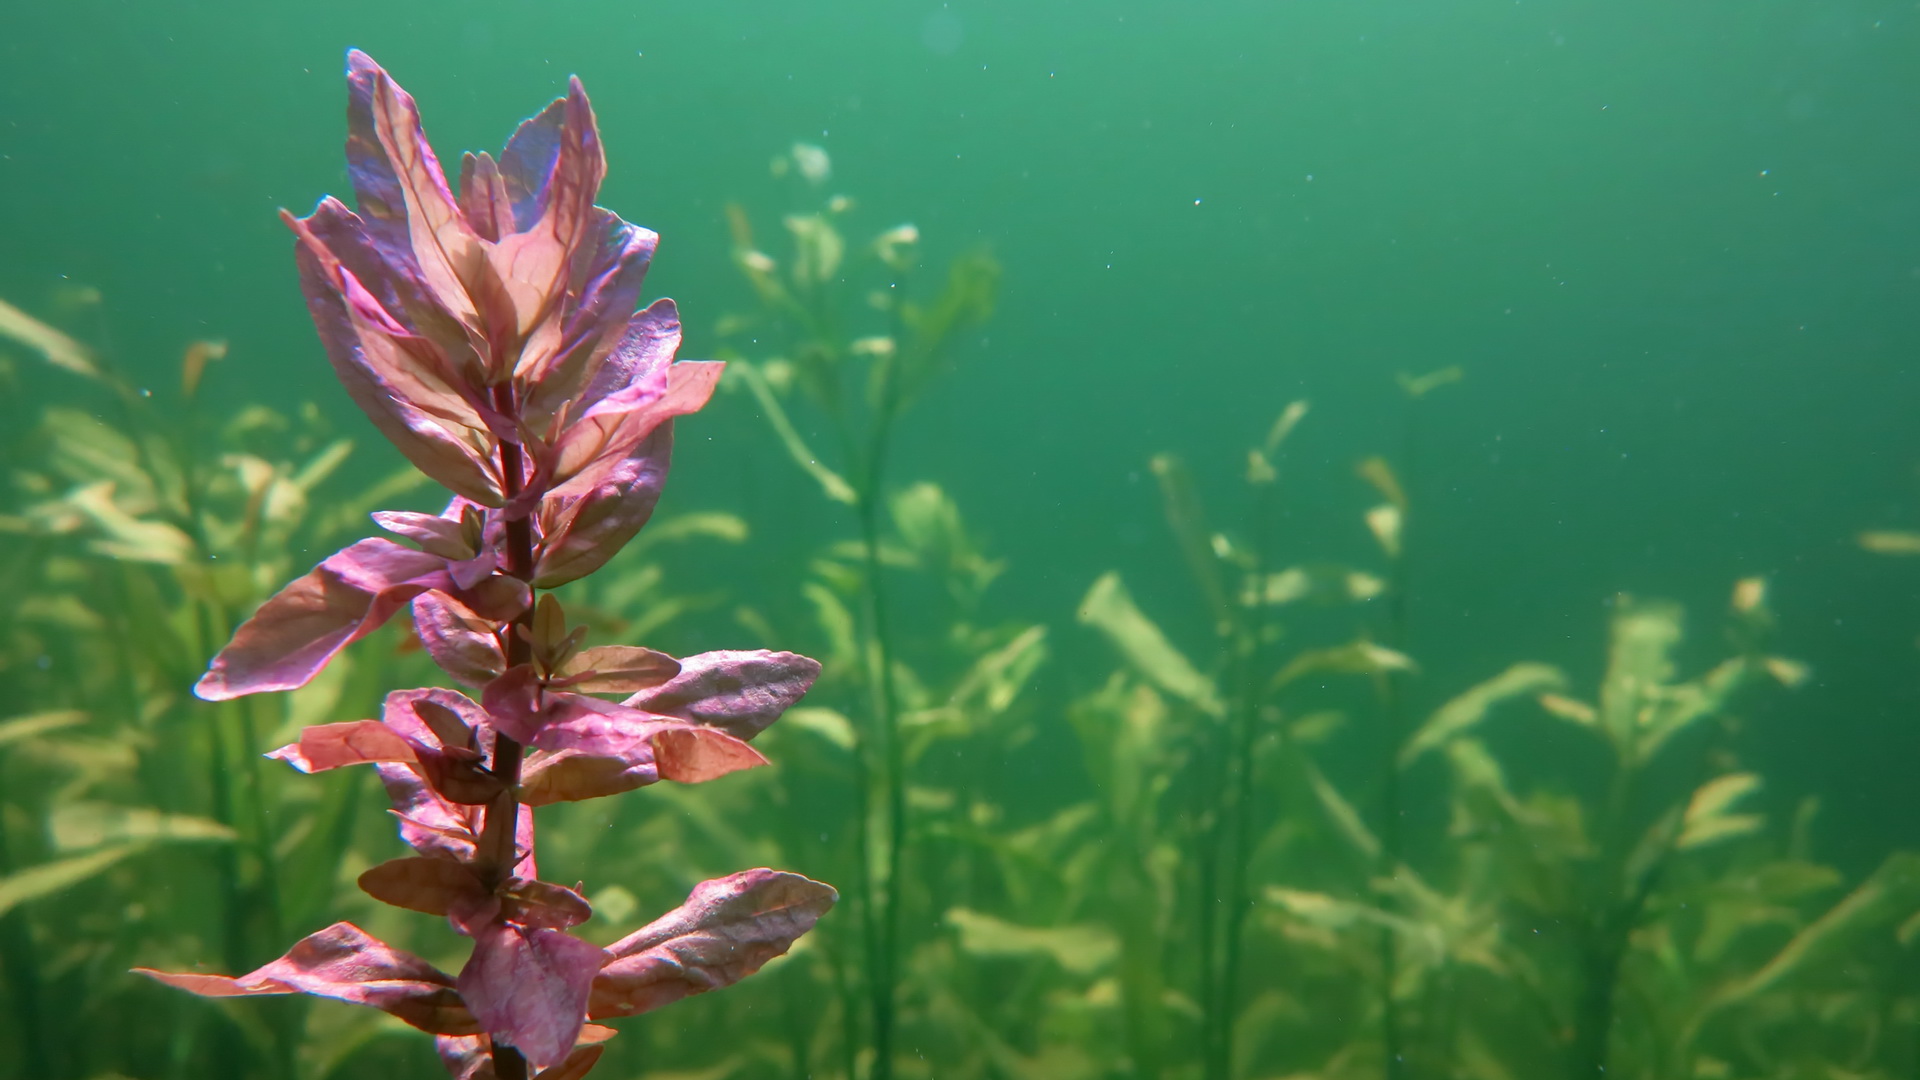 Aquatic plants are influenced by the surrounding landscape